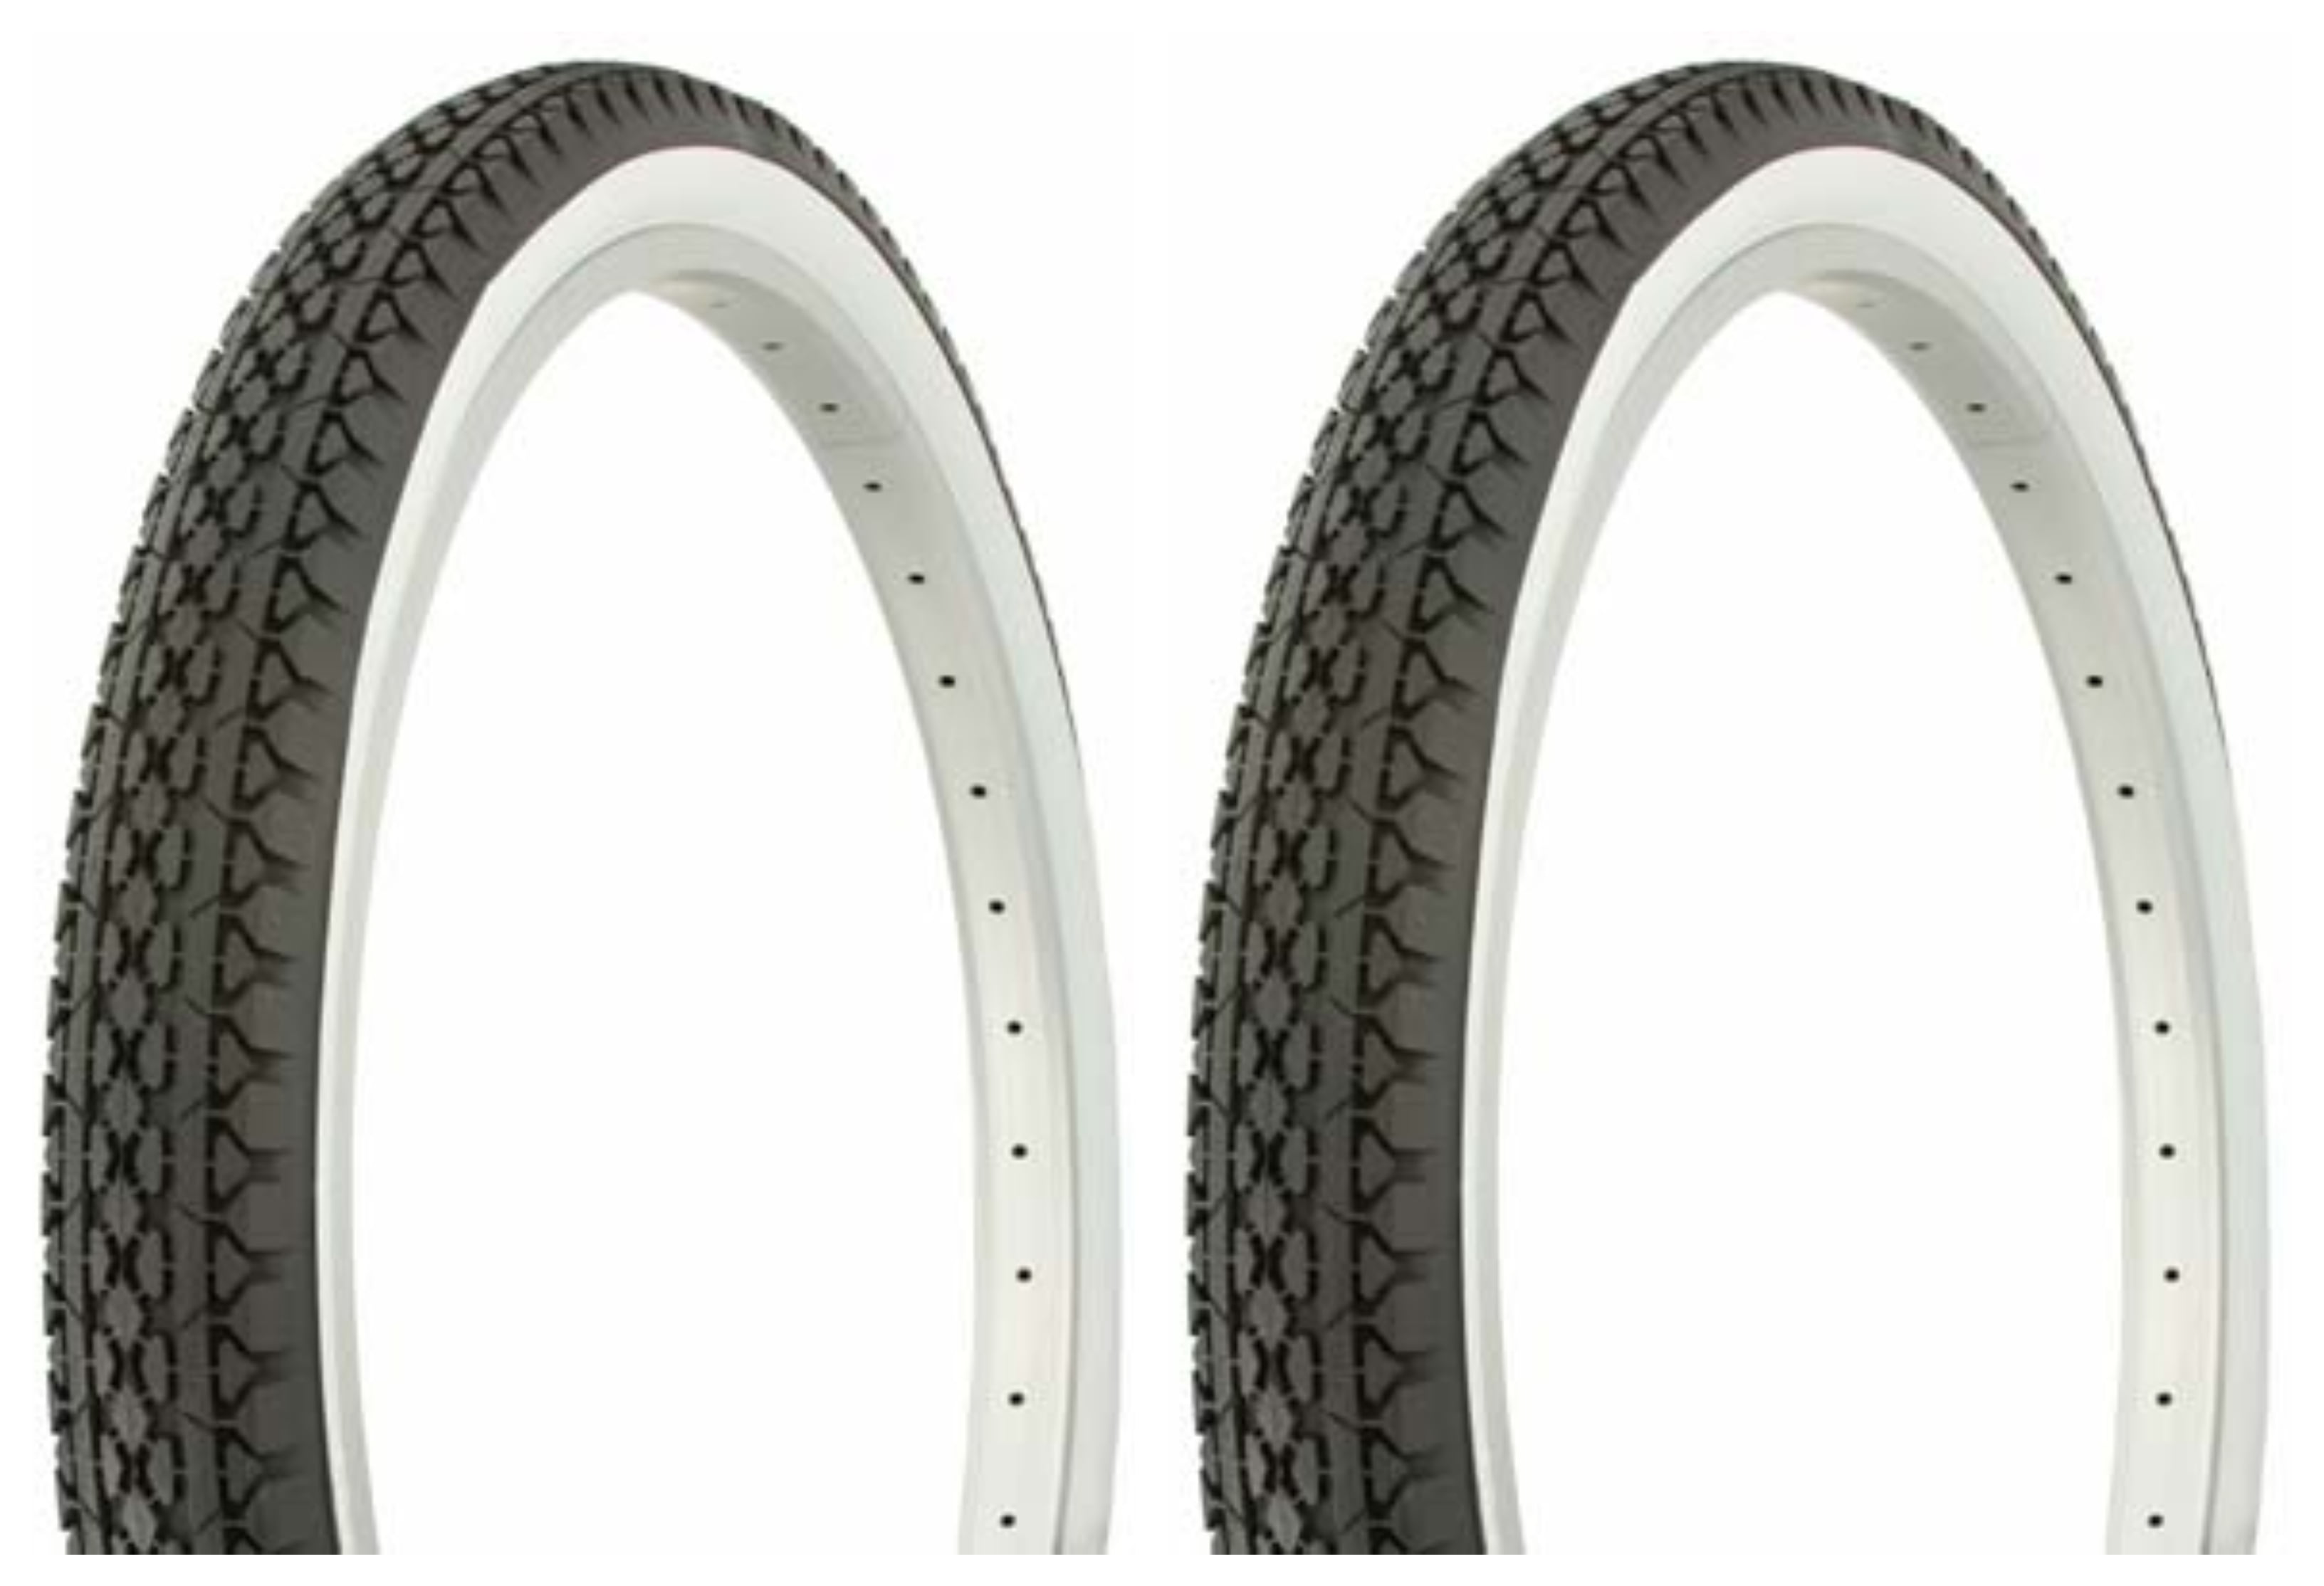 NEW  26'' X 2.125 WHITE-WALL BICYCLE TIRES TUBES & LINER FOR CRUISER CHOPPER, 